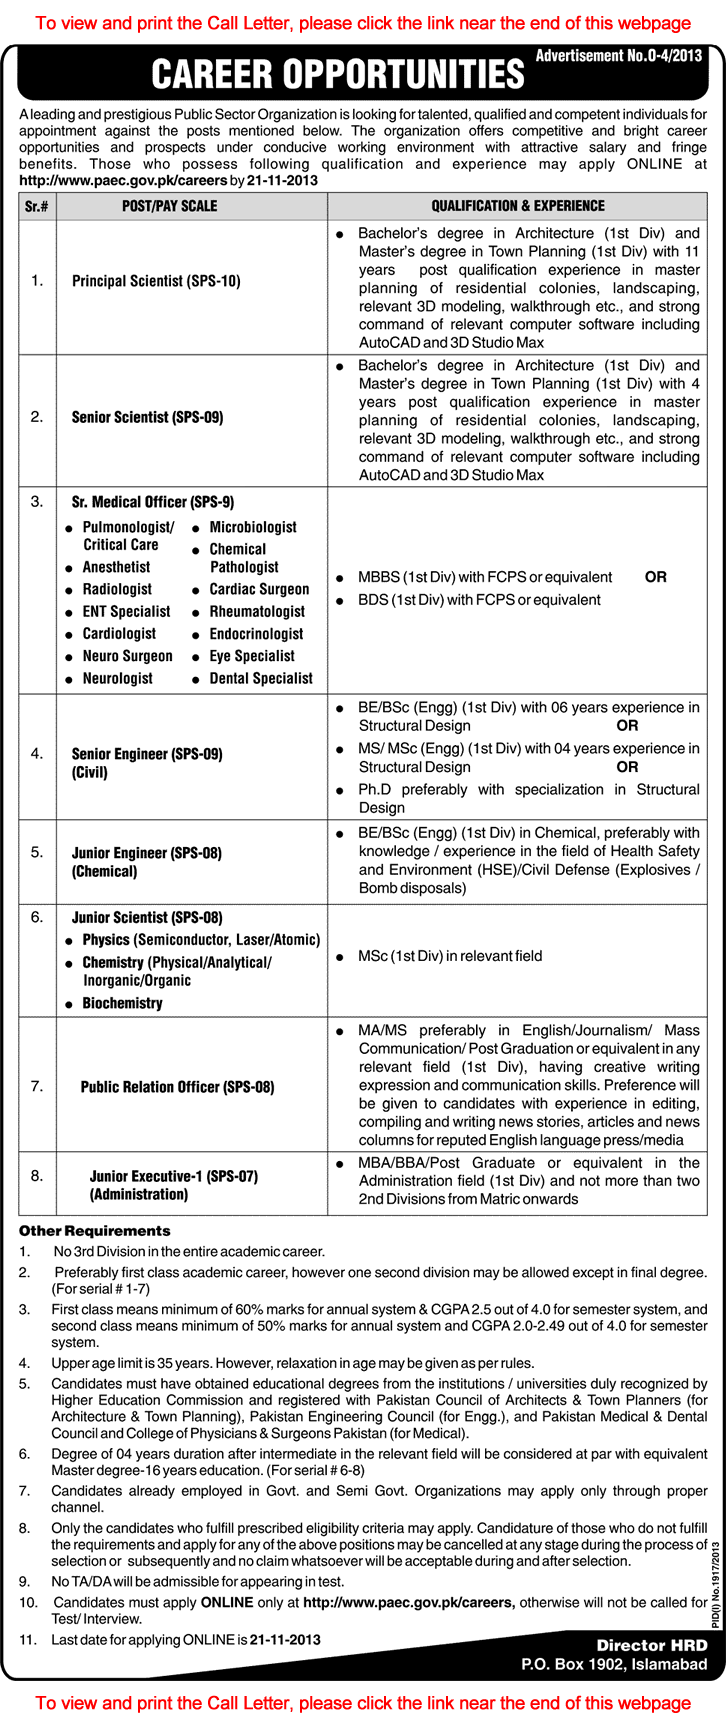 Pakistan Atomic Energy Commission Jobs 2014 Online Call Letter Print with Written Test Date, Time & Center